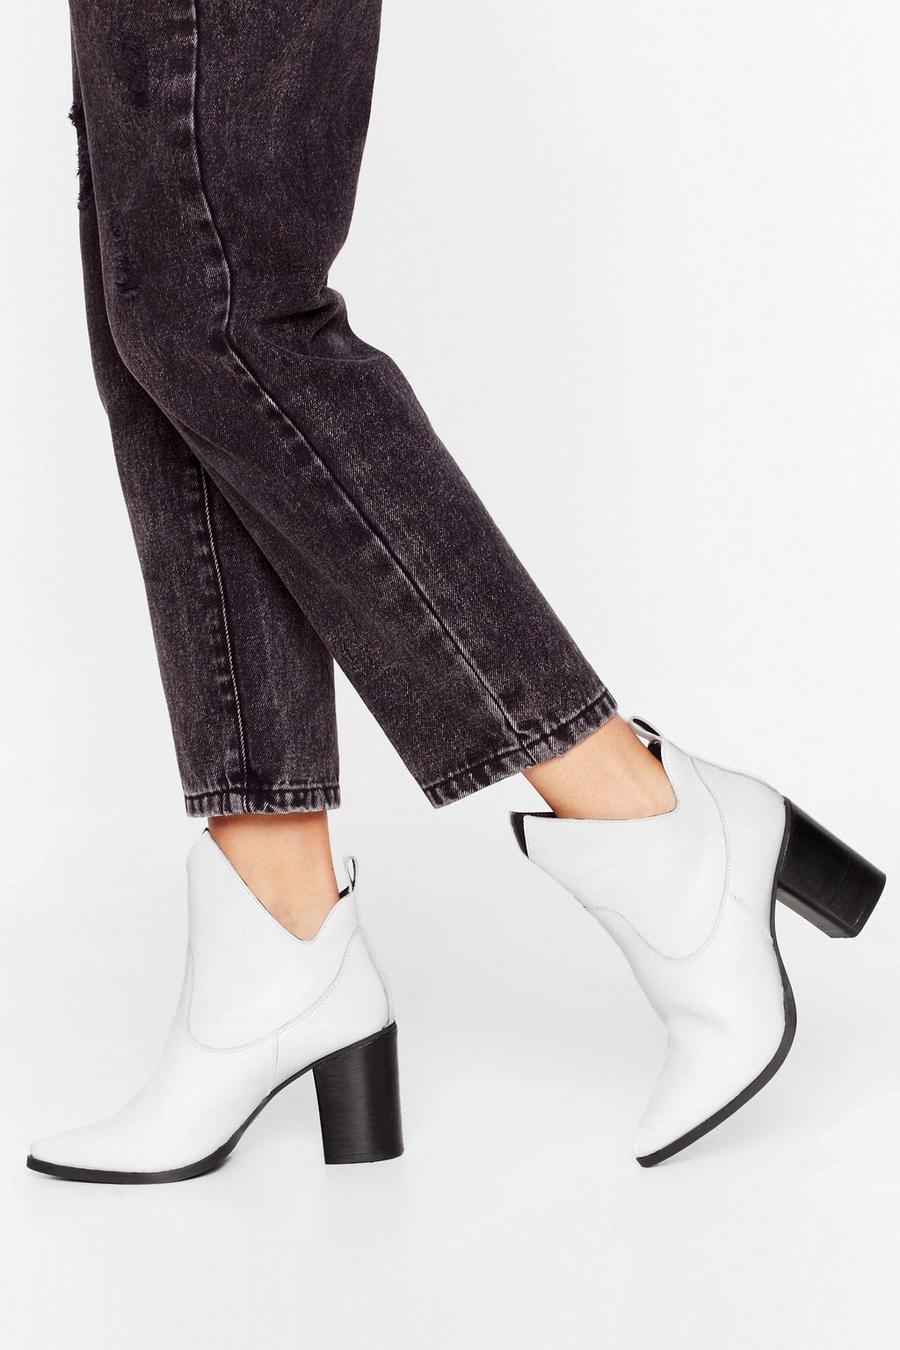 White Boots | White Ankle Boots & Booties | Nasty Gal